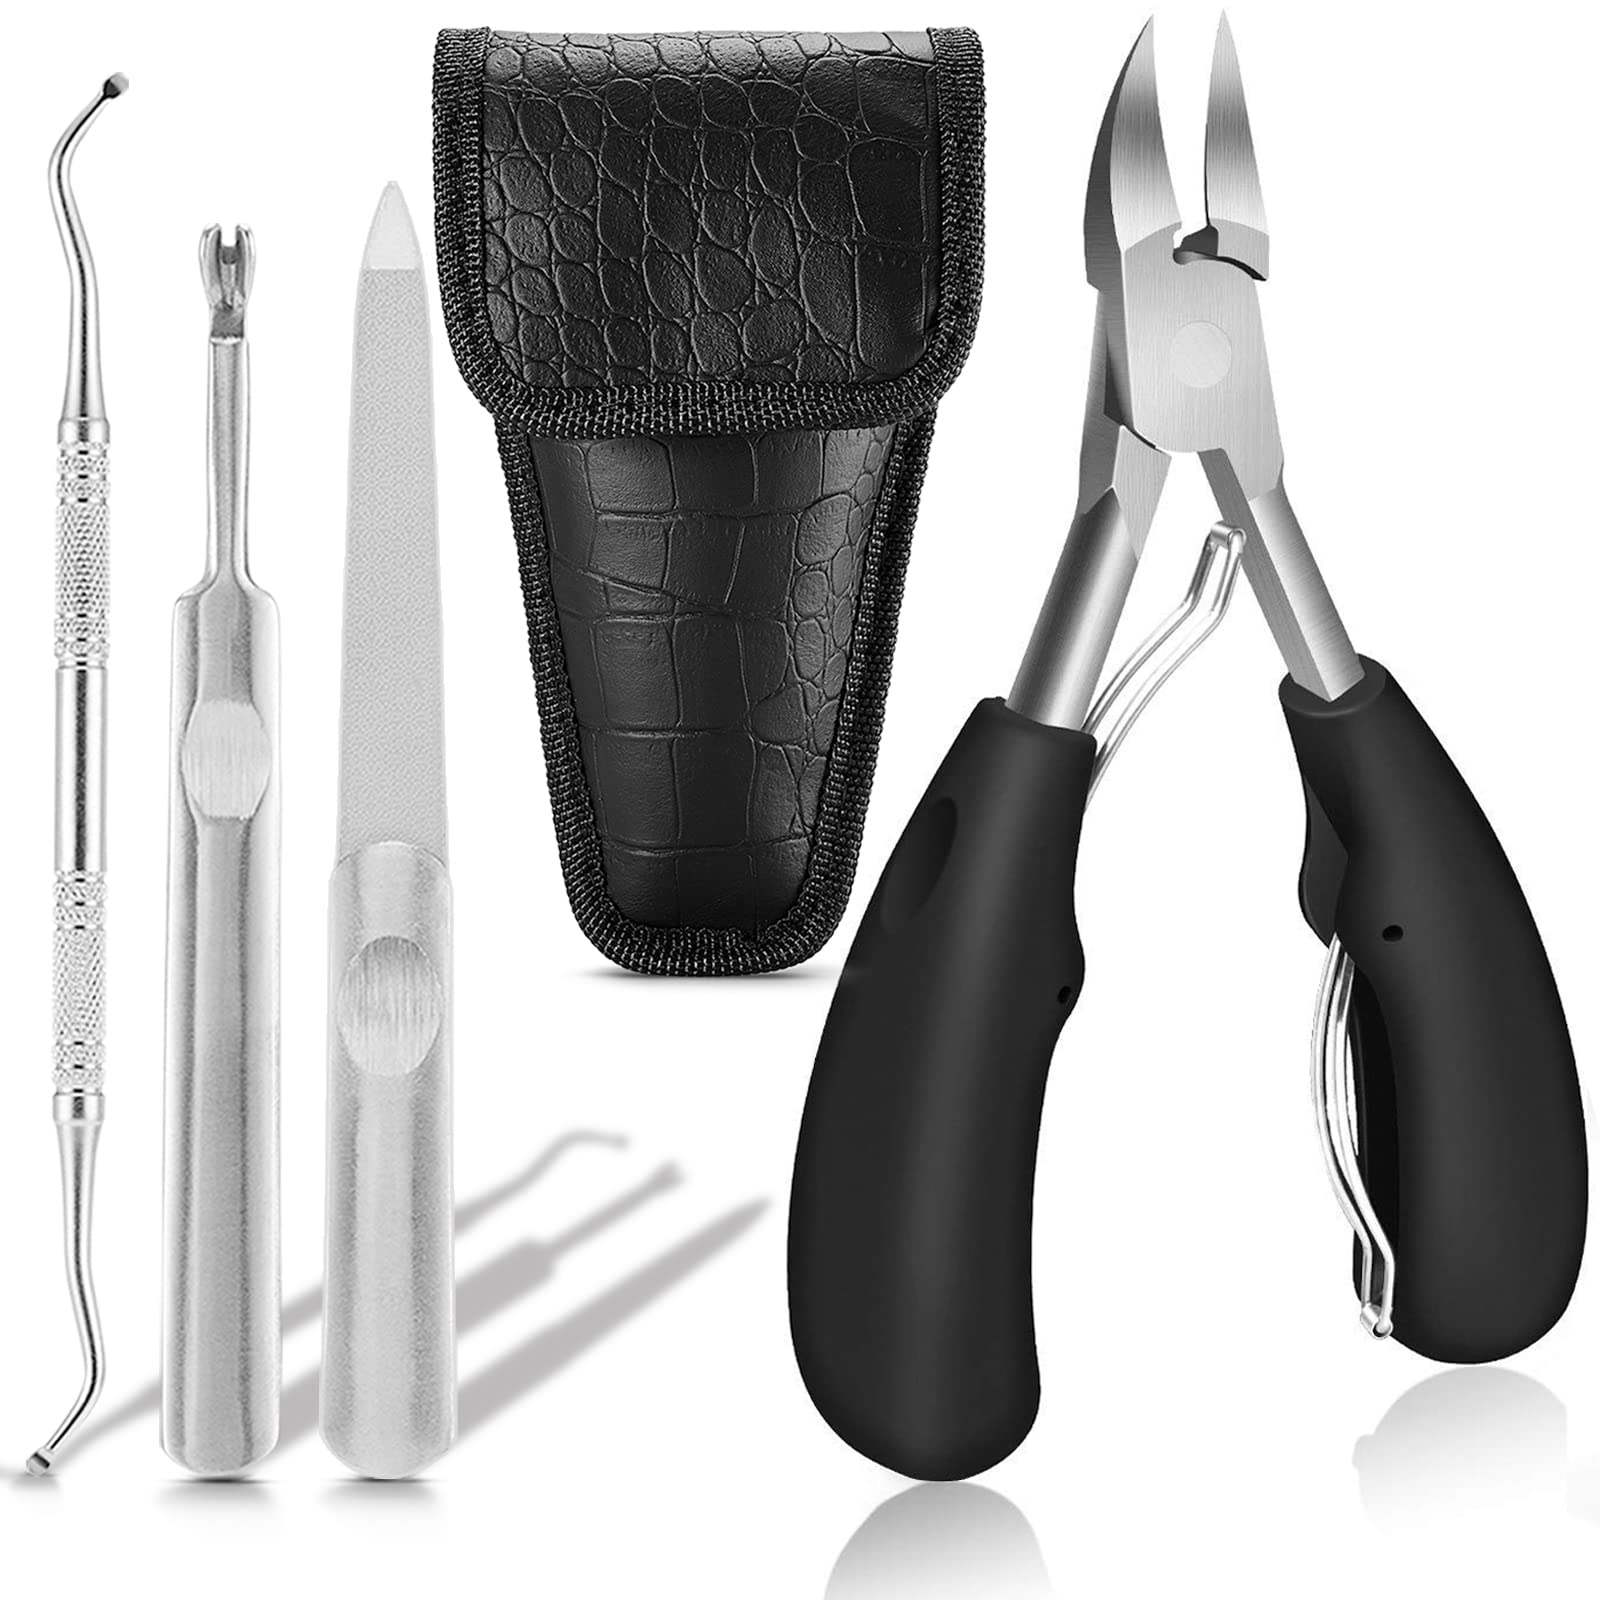 Toenail Clippers, Professional Nail Clippers For Thick Toenails